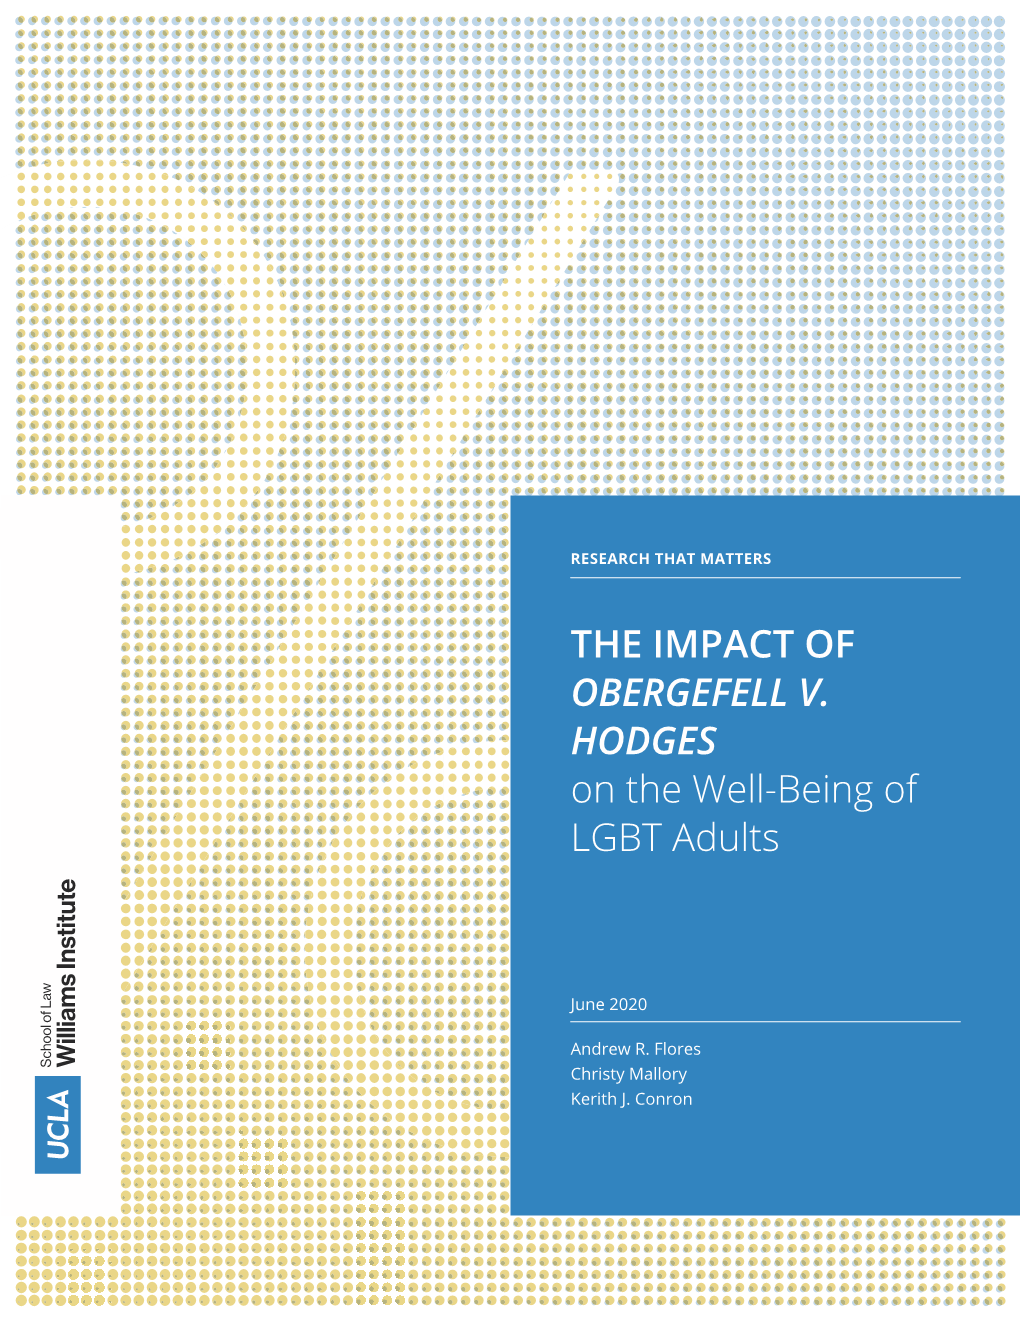 THE IMPACT of OBERGEFELL V. HODGES on the Well-Being of LGBT Adults